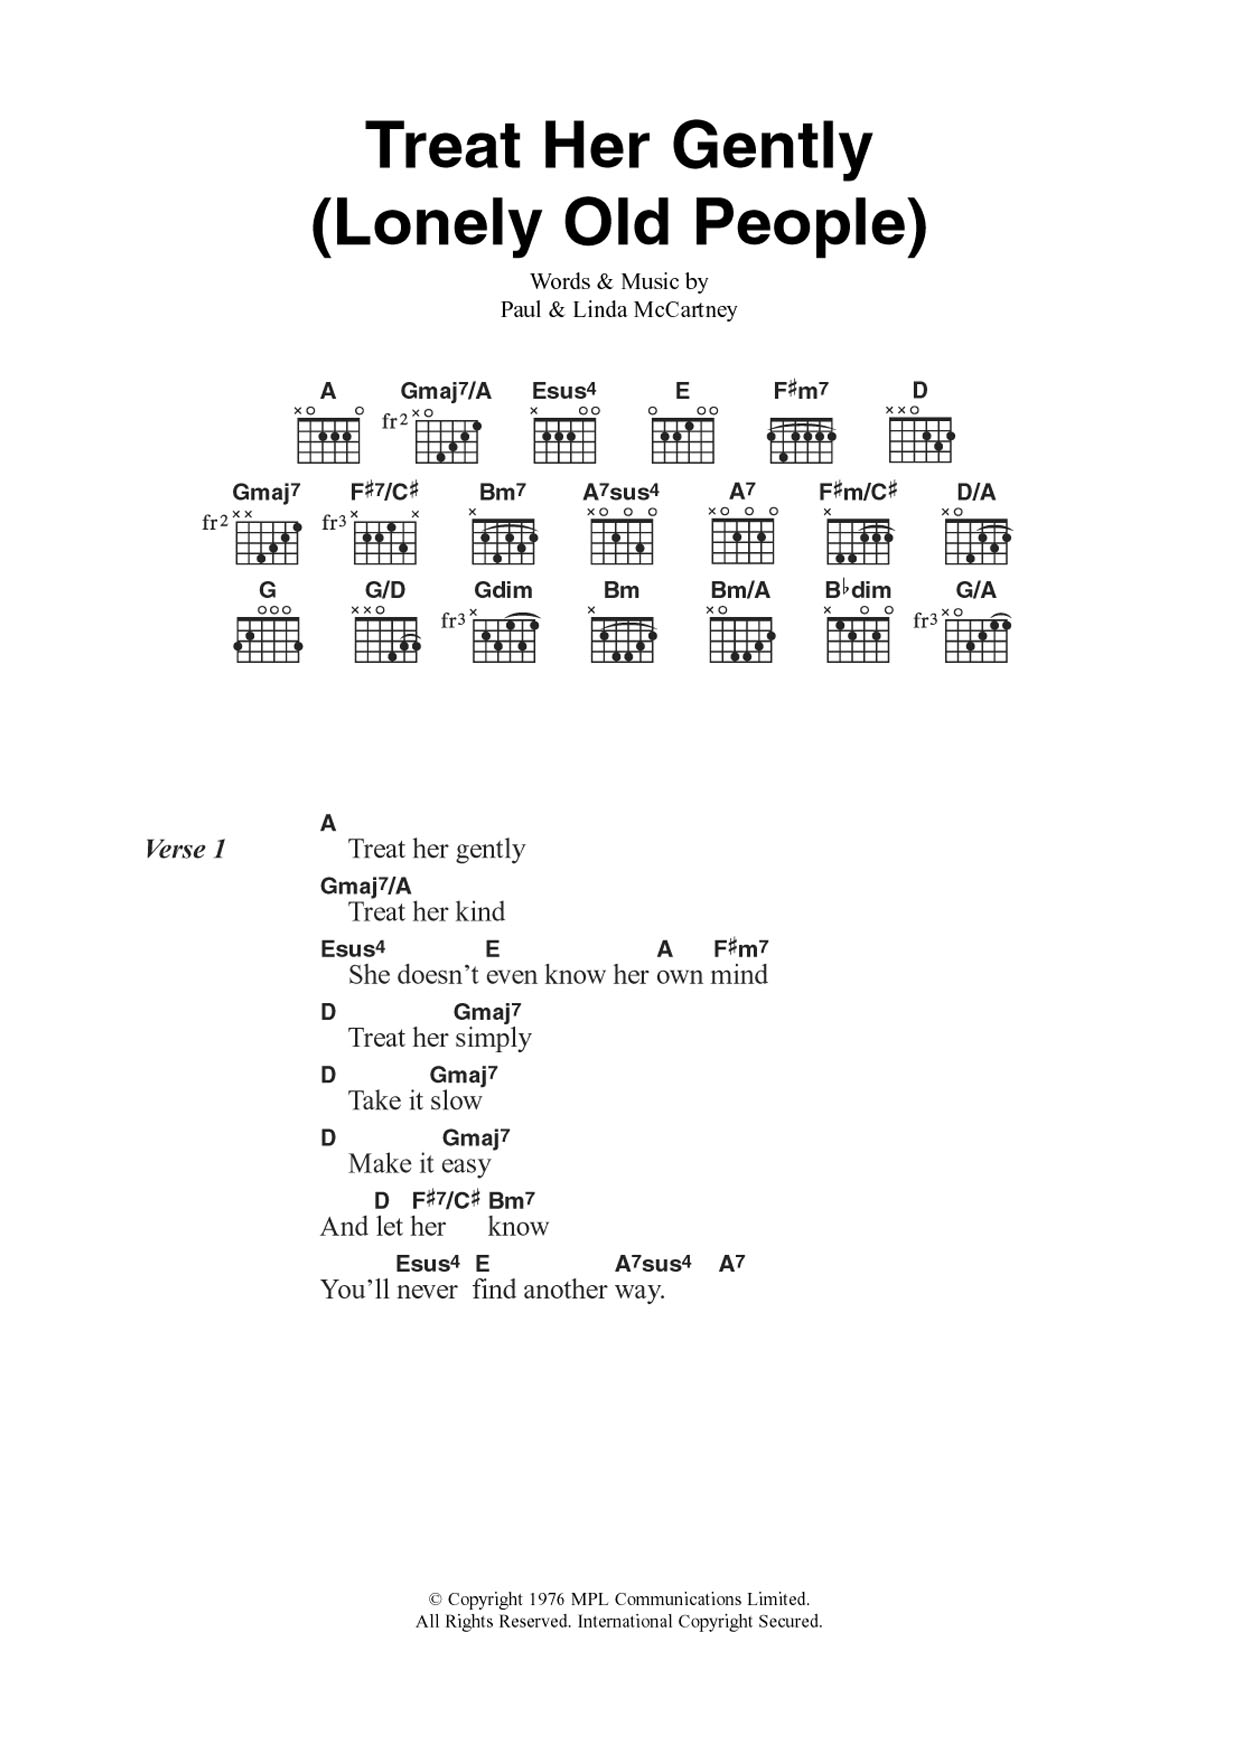 Download Wings Treat Her Gently (Lonely Old People) Sheet Music